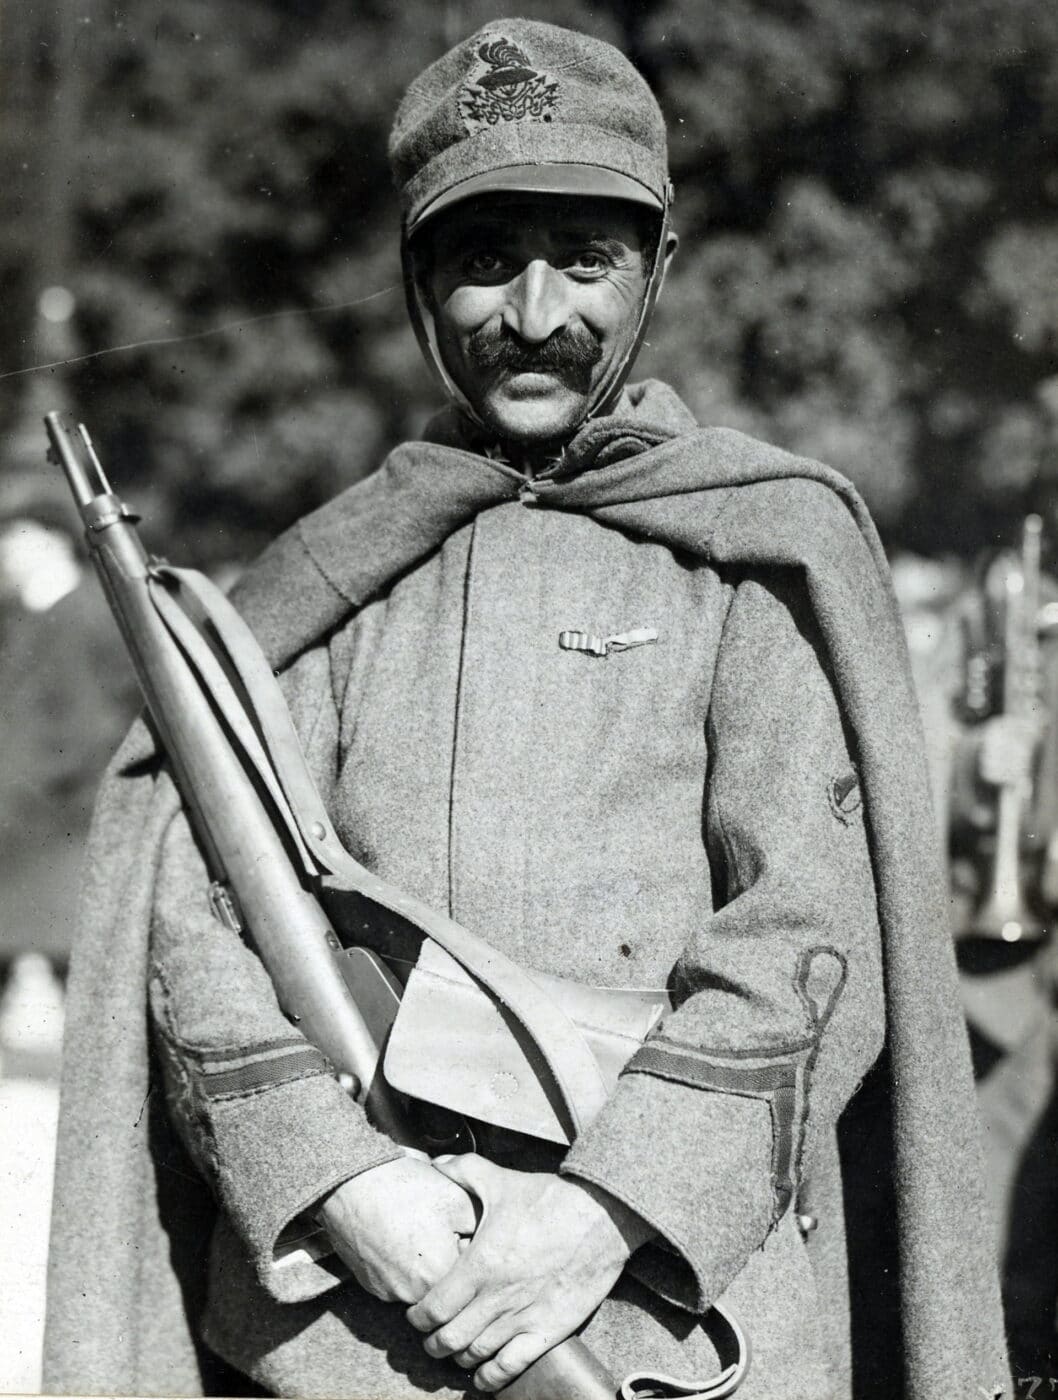 Italian soldier with Carcano carbine during WW1